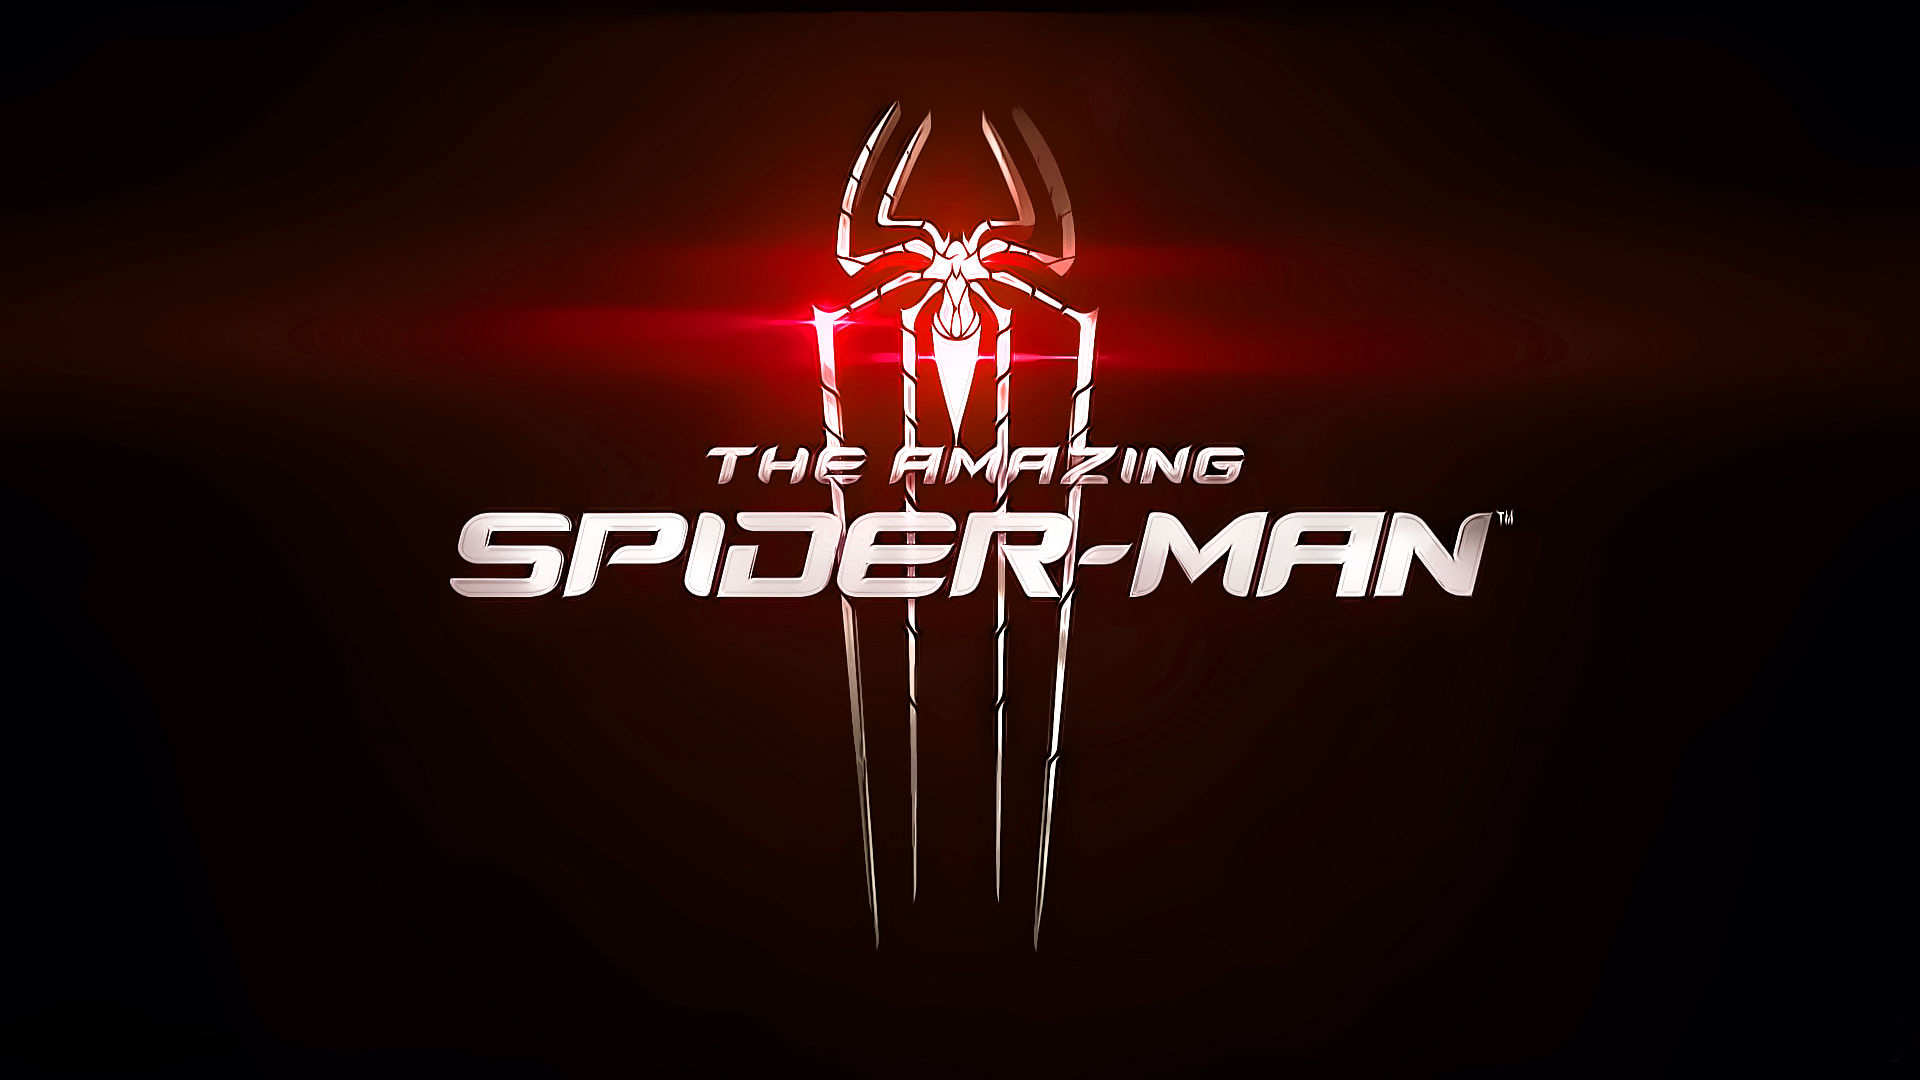 Spiderman Logo Wallpapers for Computer 299 - HD Wallpapers Site